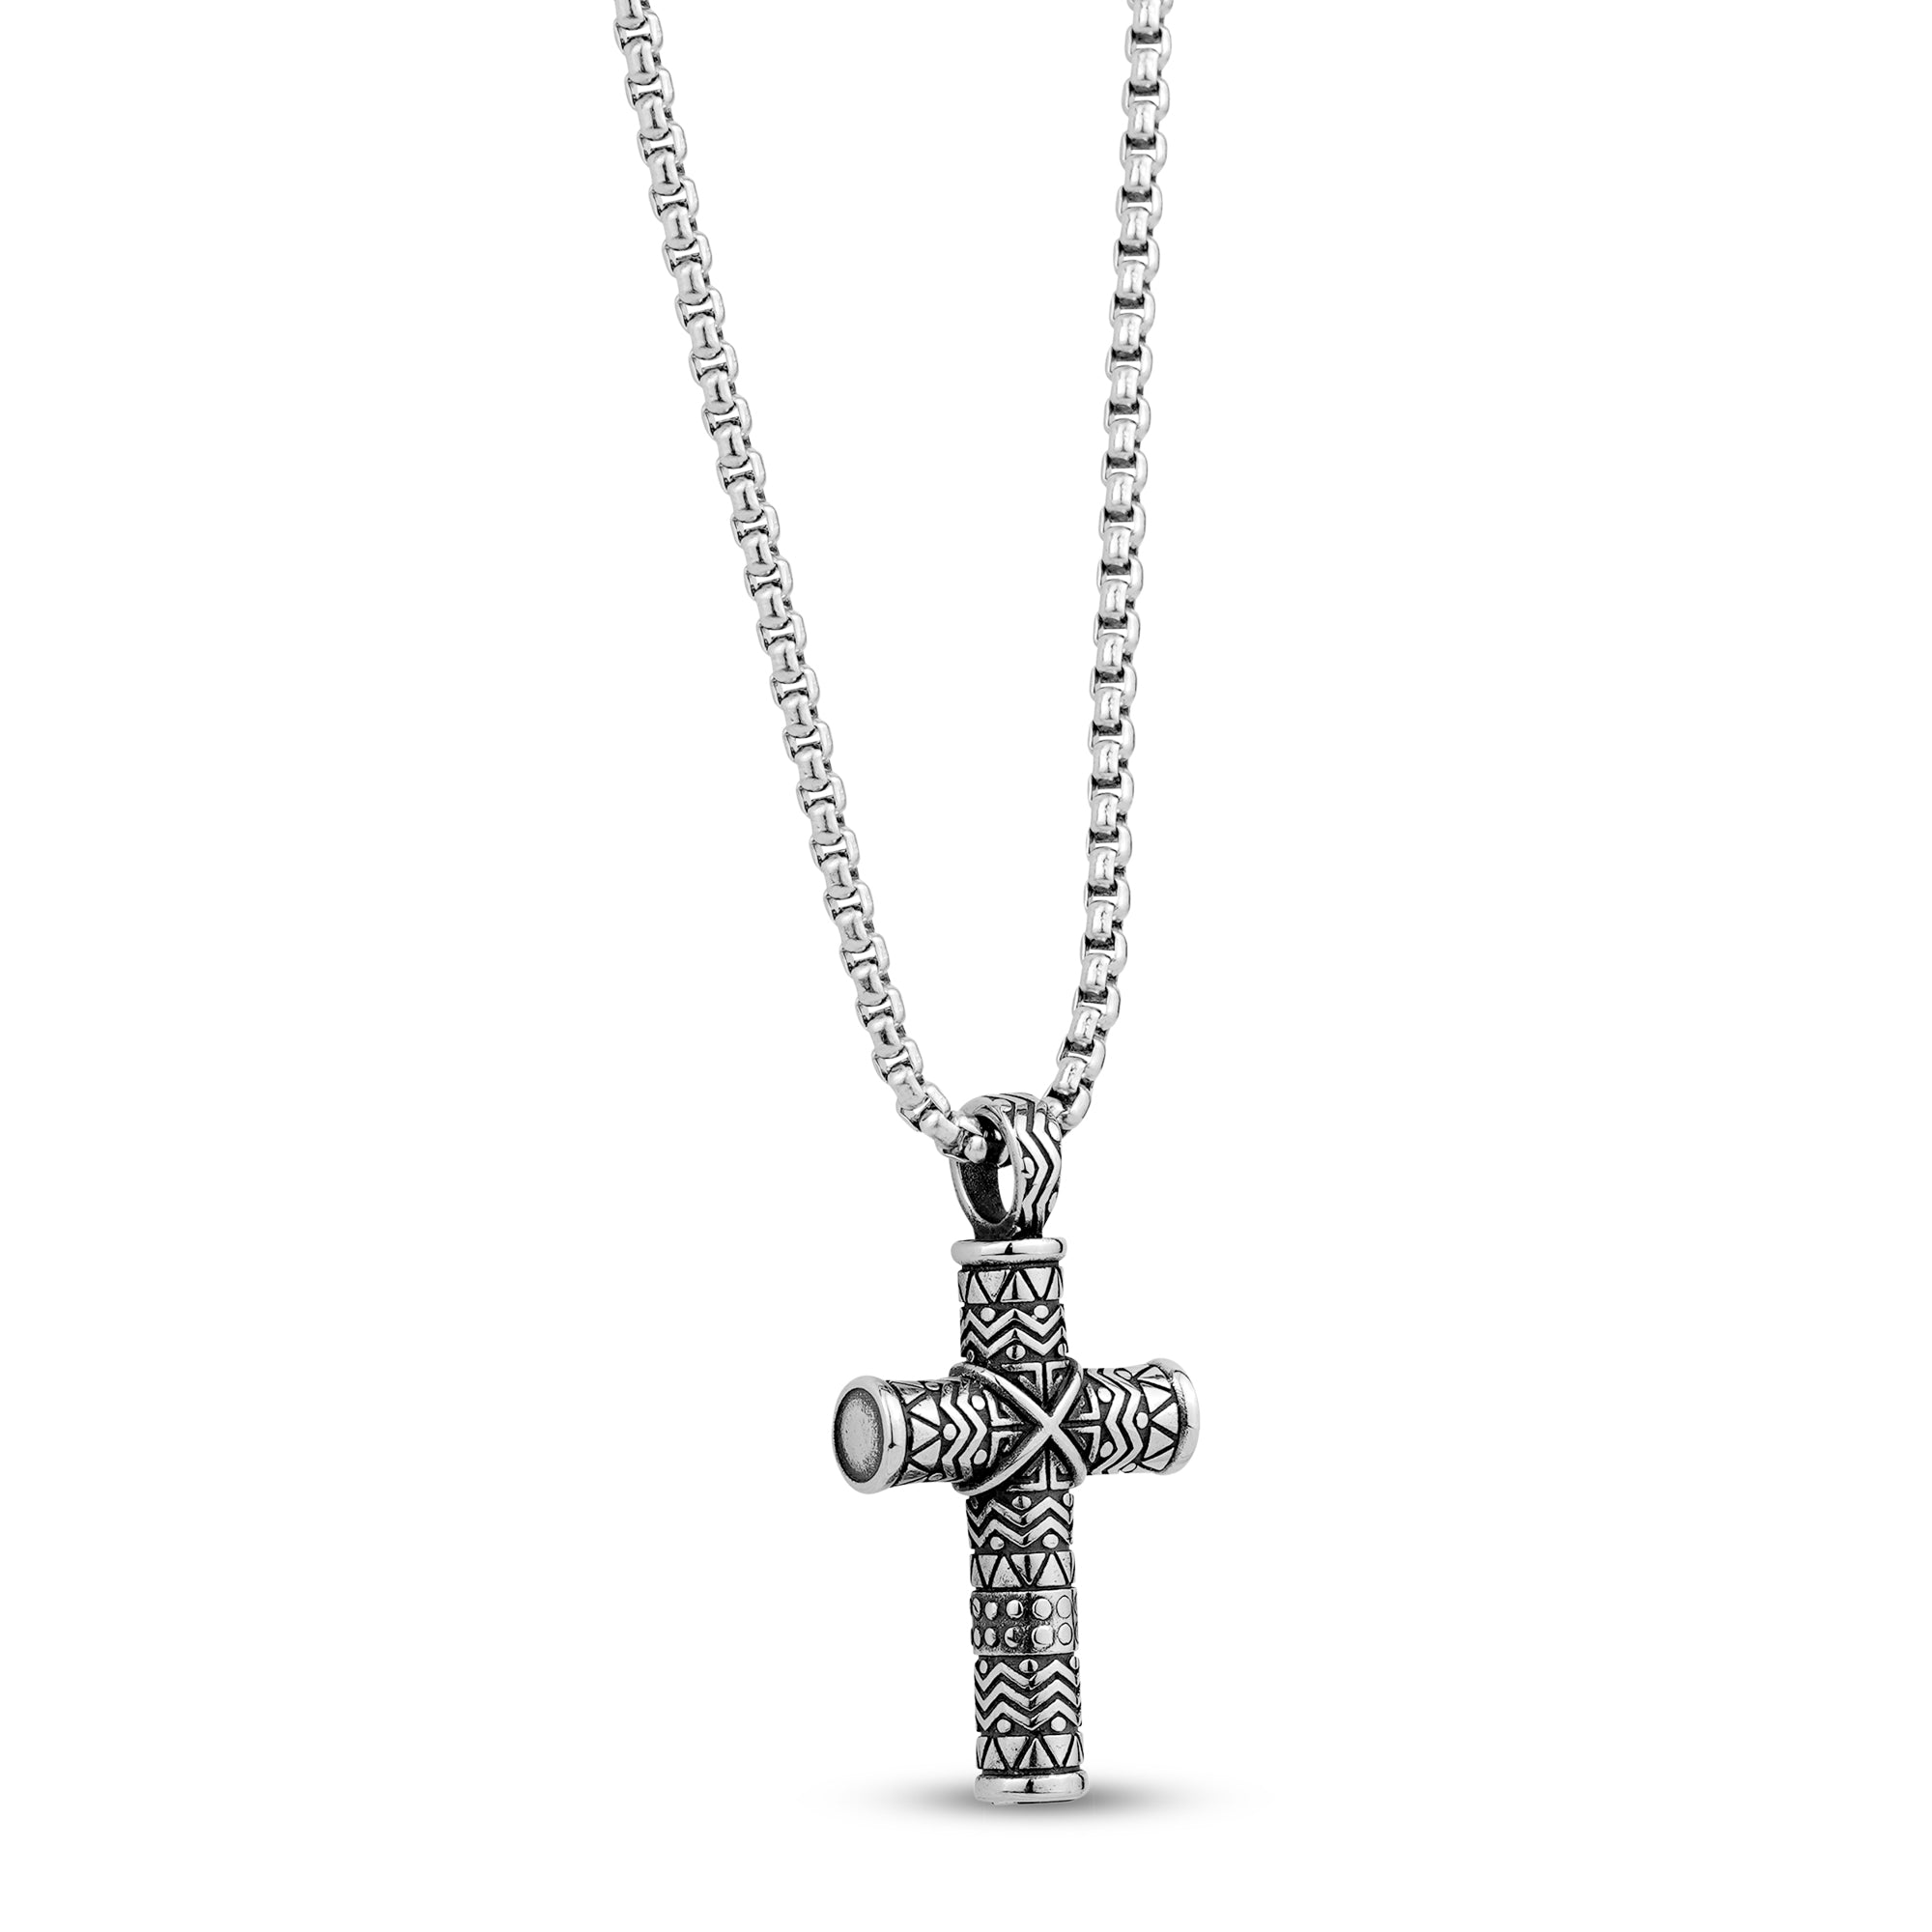 Cremation Urn Cross Necklace - Get 10% Off Your First Order*